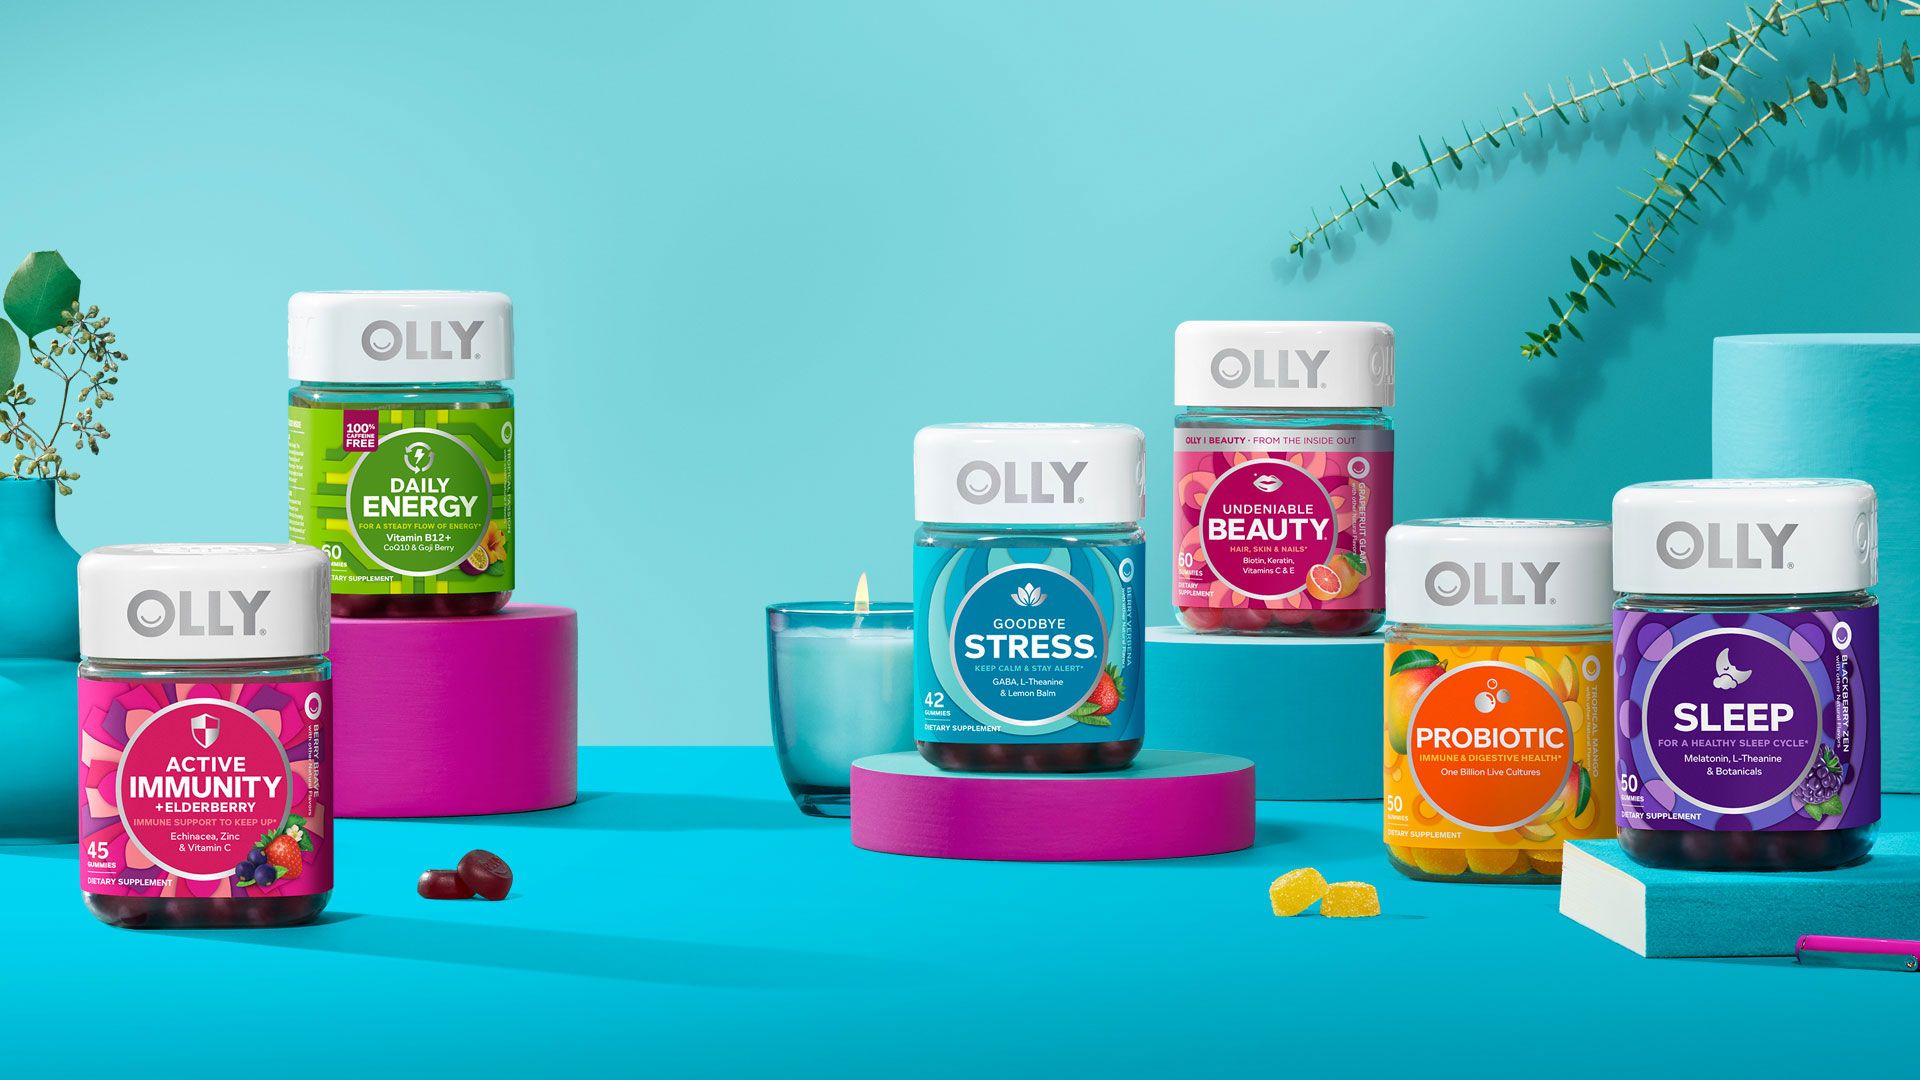 An assortment of OLLY Ultra Strength Softgels products in a colorful setting.